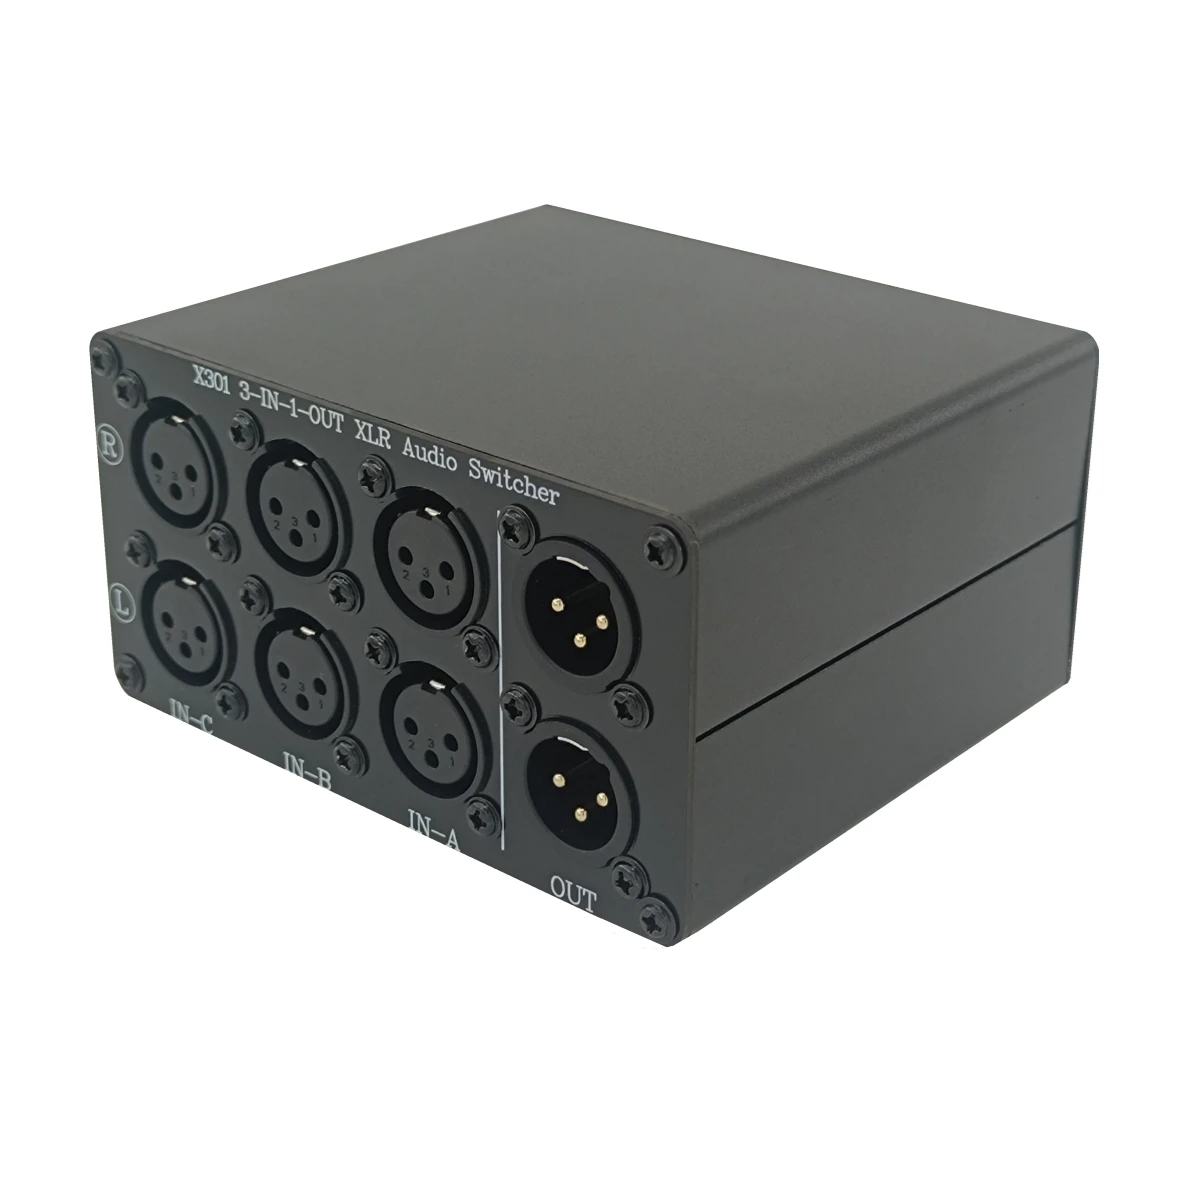 X301 XLR Stereo Audio Switch box, 3-Way Balanced Audio Converter, Passive Signal Source Audio Input Selector Switcher 3 in 1 Out